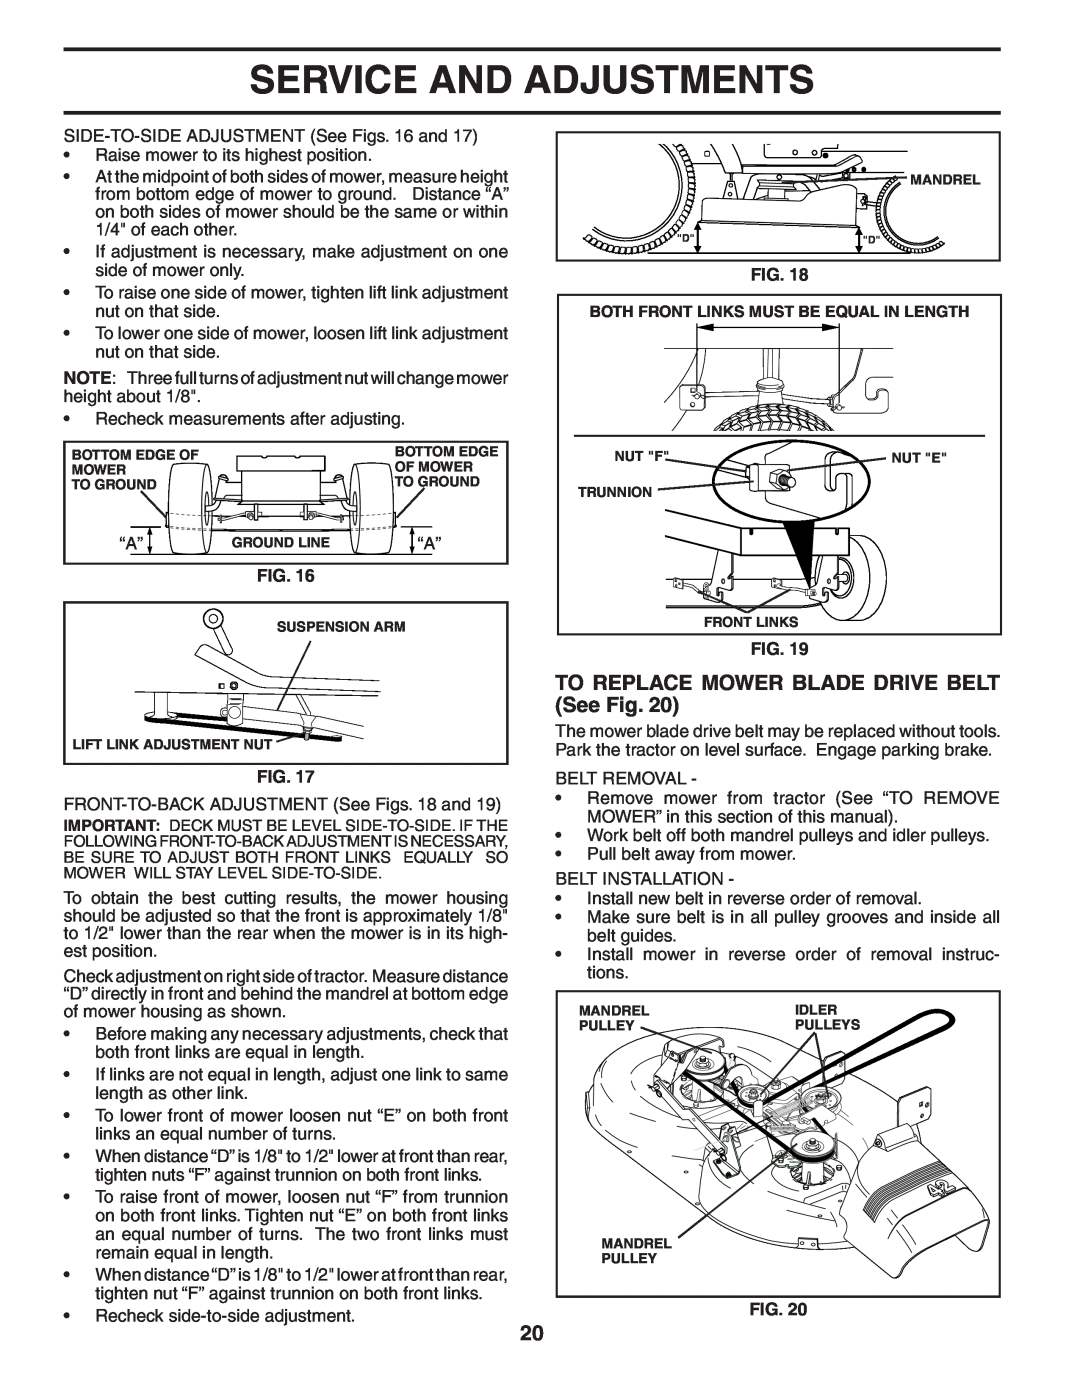 Poulan 194992 manual TO REPLACE MOWER BLADE DRIVE BELT See Fig, Service And Adjustments 